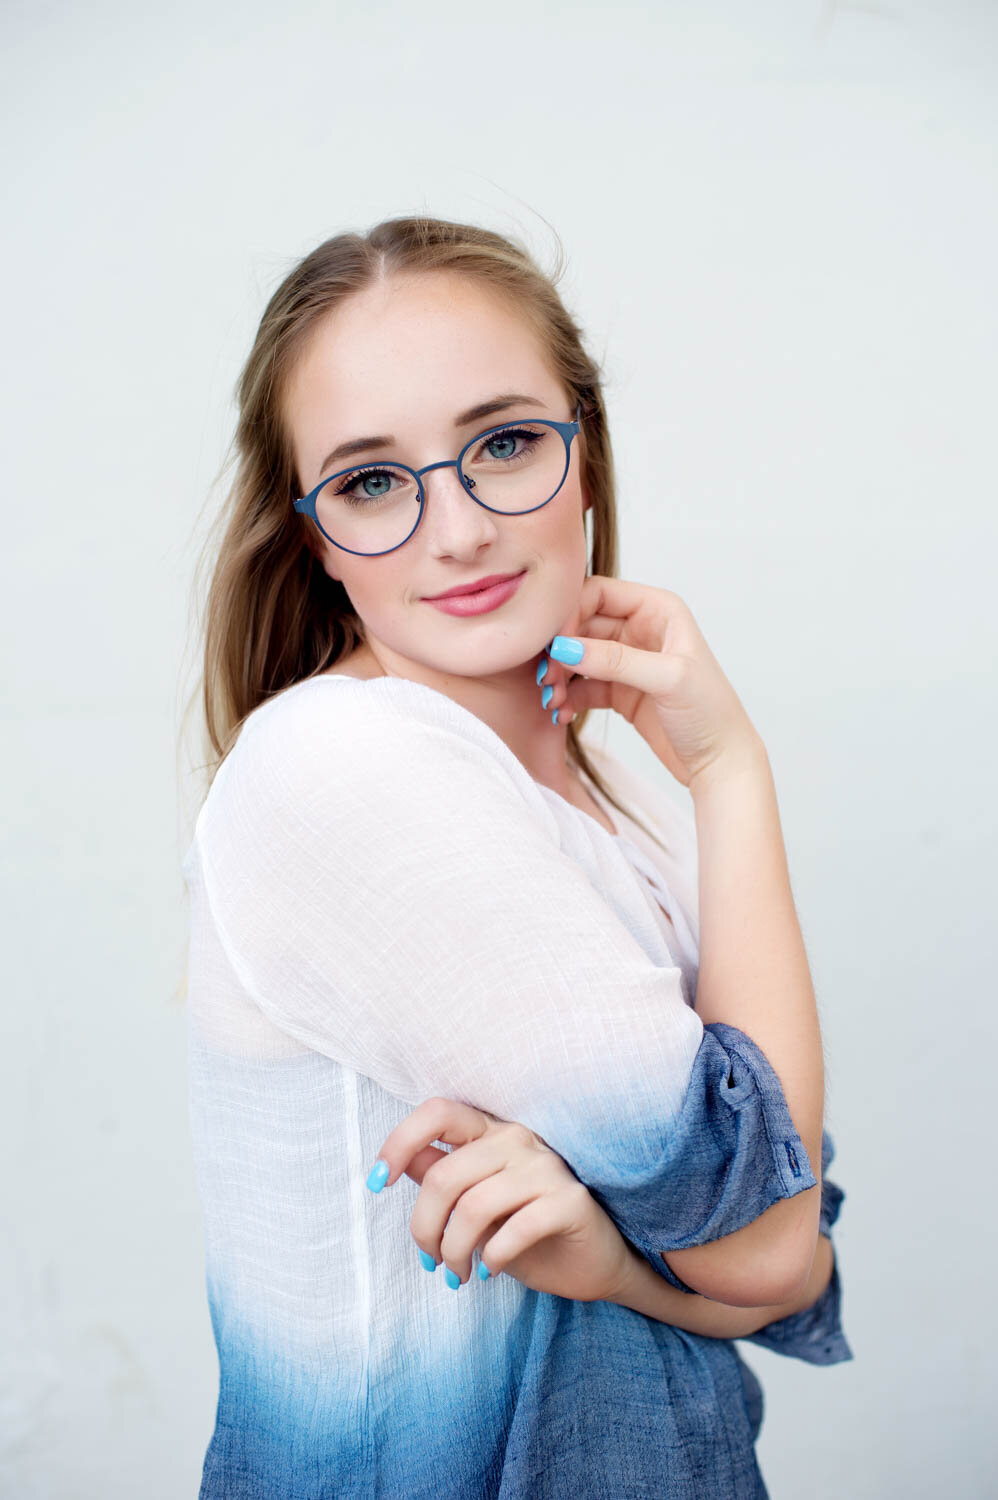 Professional head shot of young woman with colorful blue glasses and an ombre blue and white shirt.